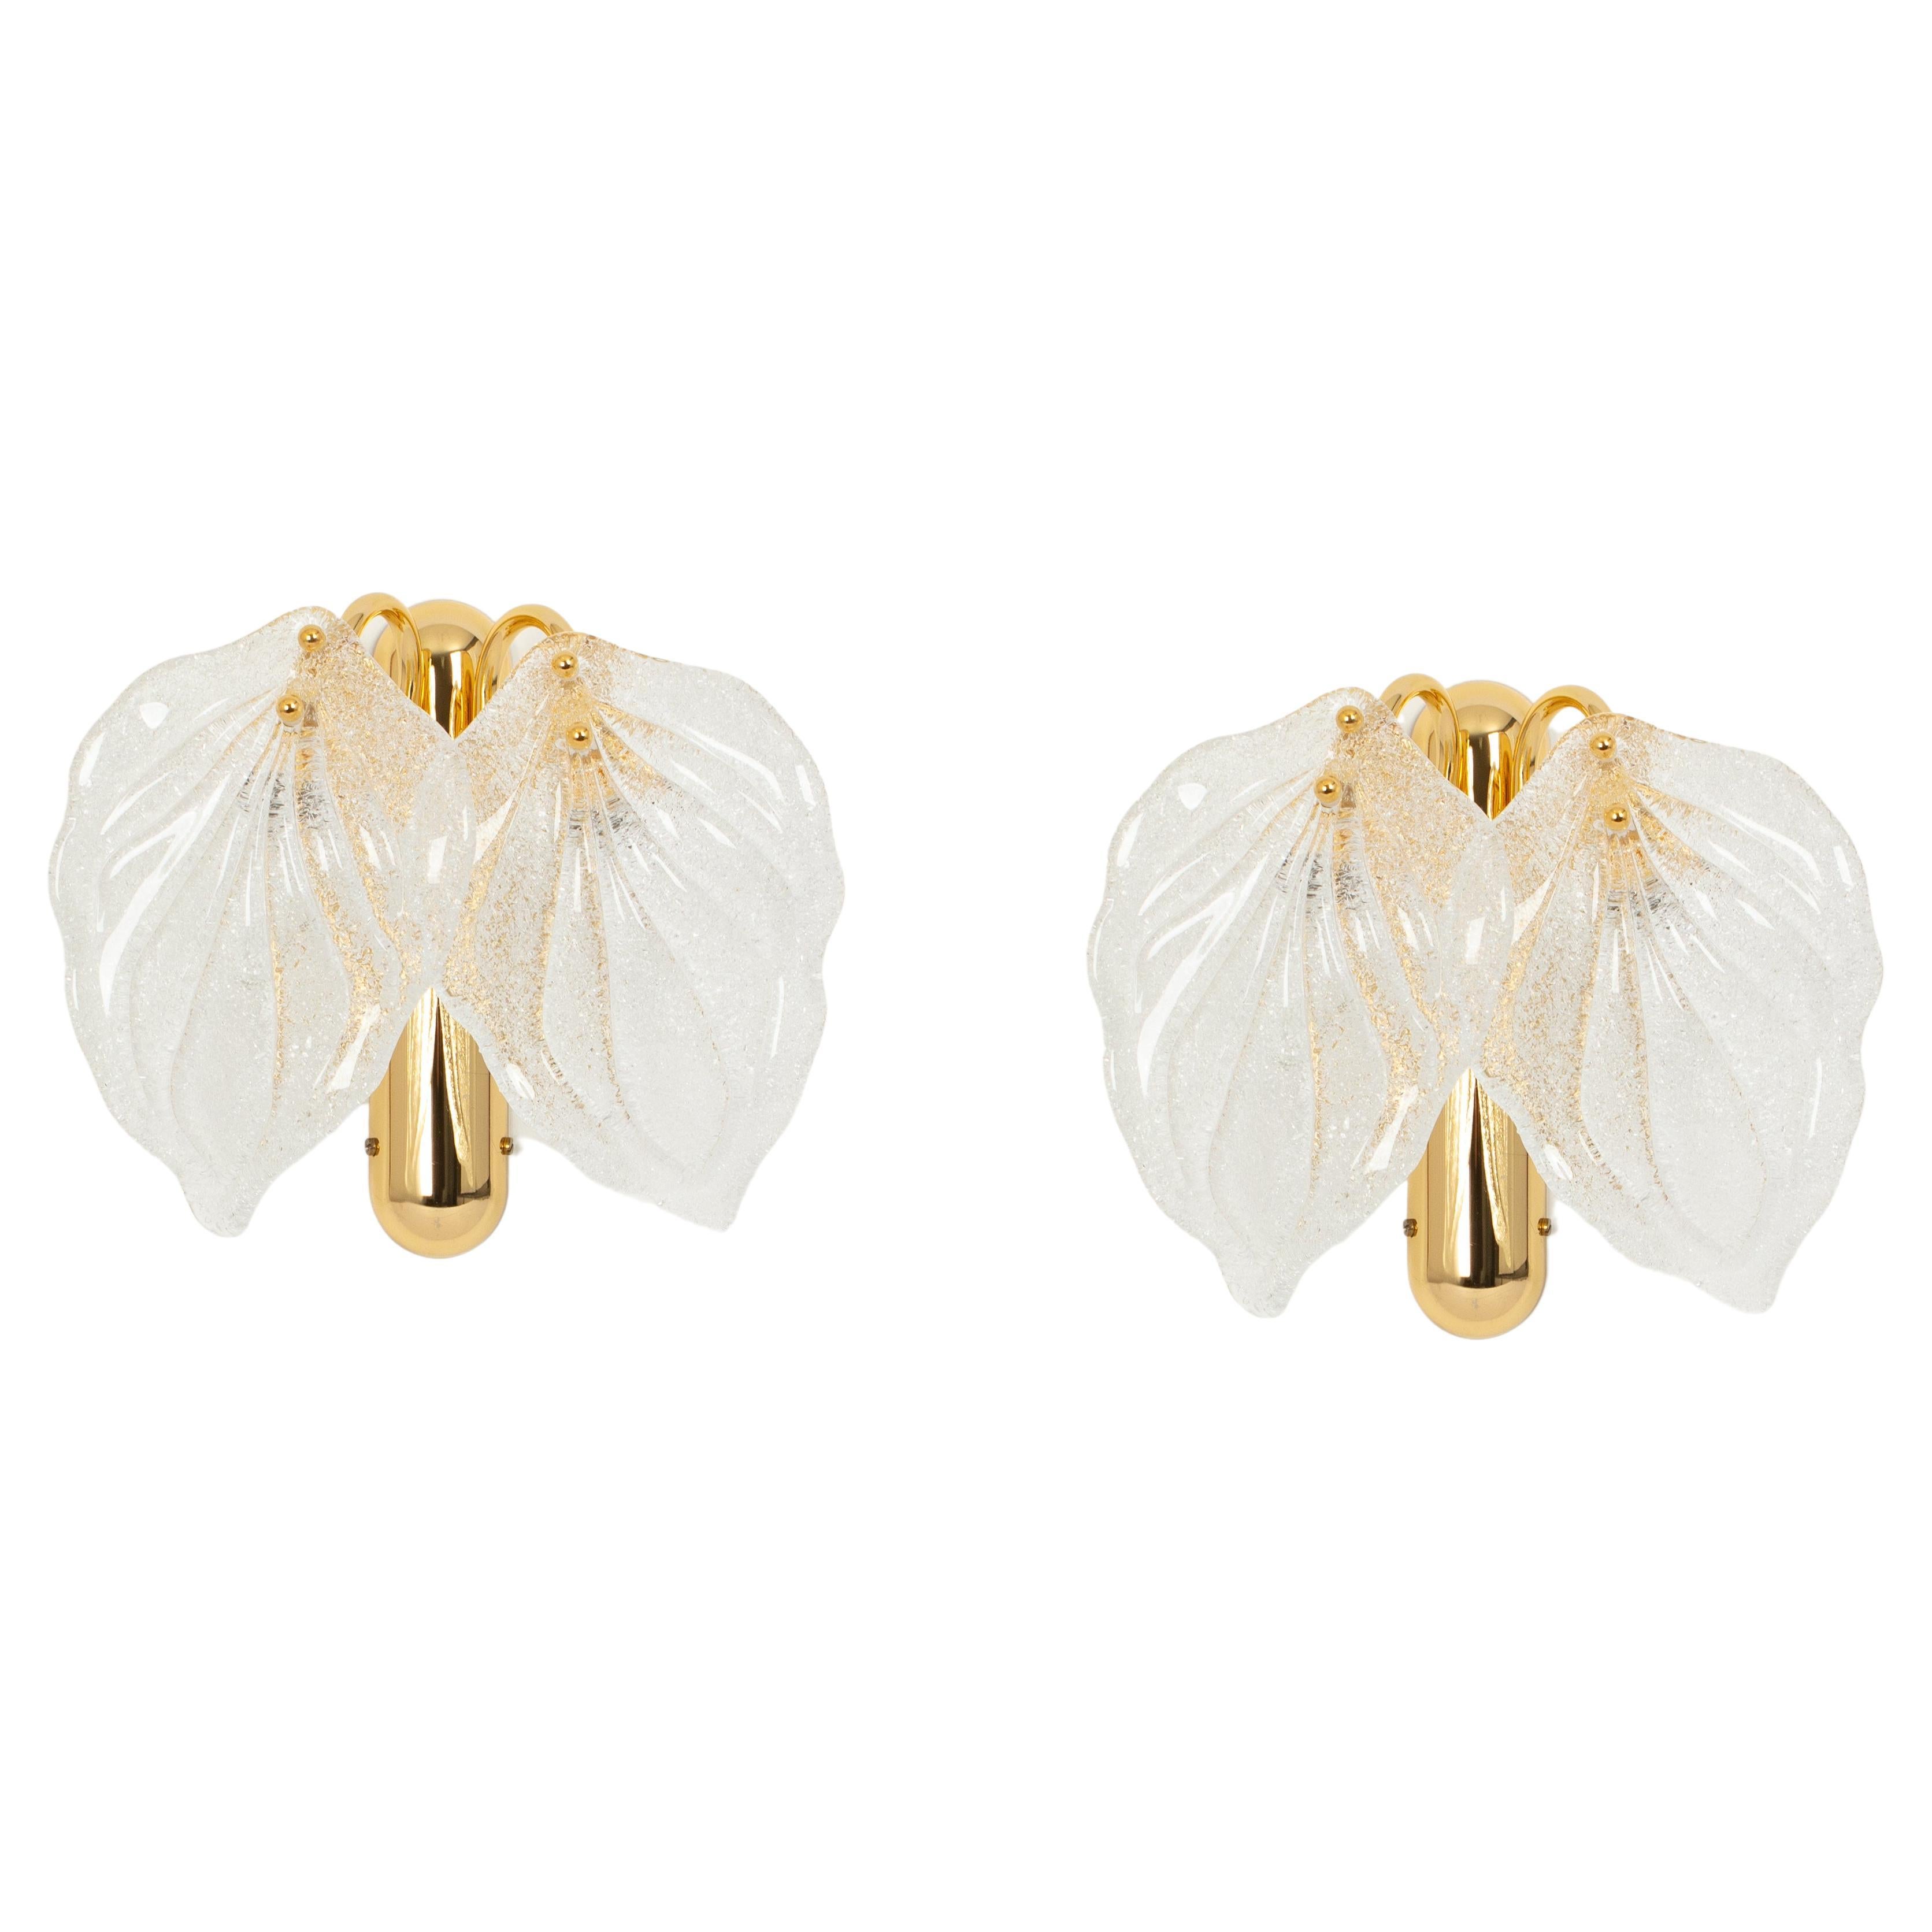 Pair of Large Stunning Murano Glass Wall Sconce by Novaresi, Italy, 1970s For Sale